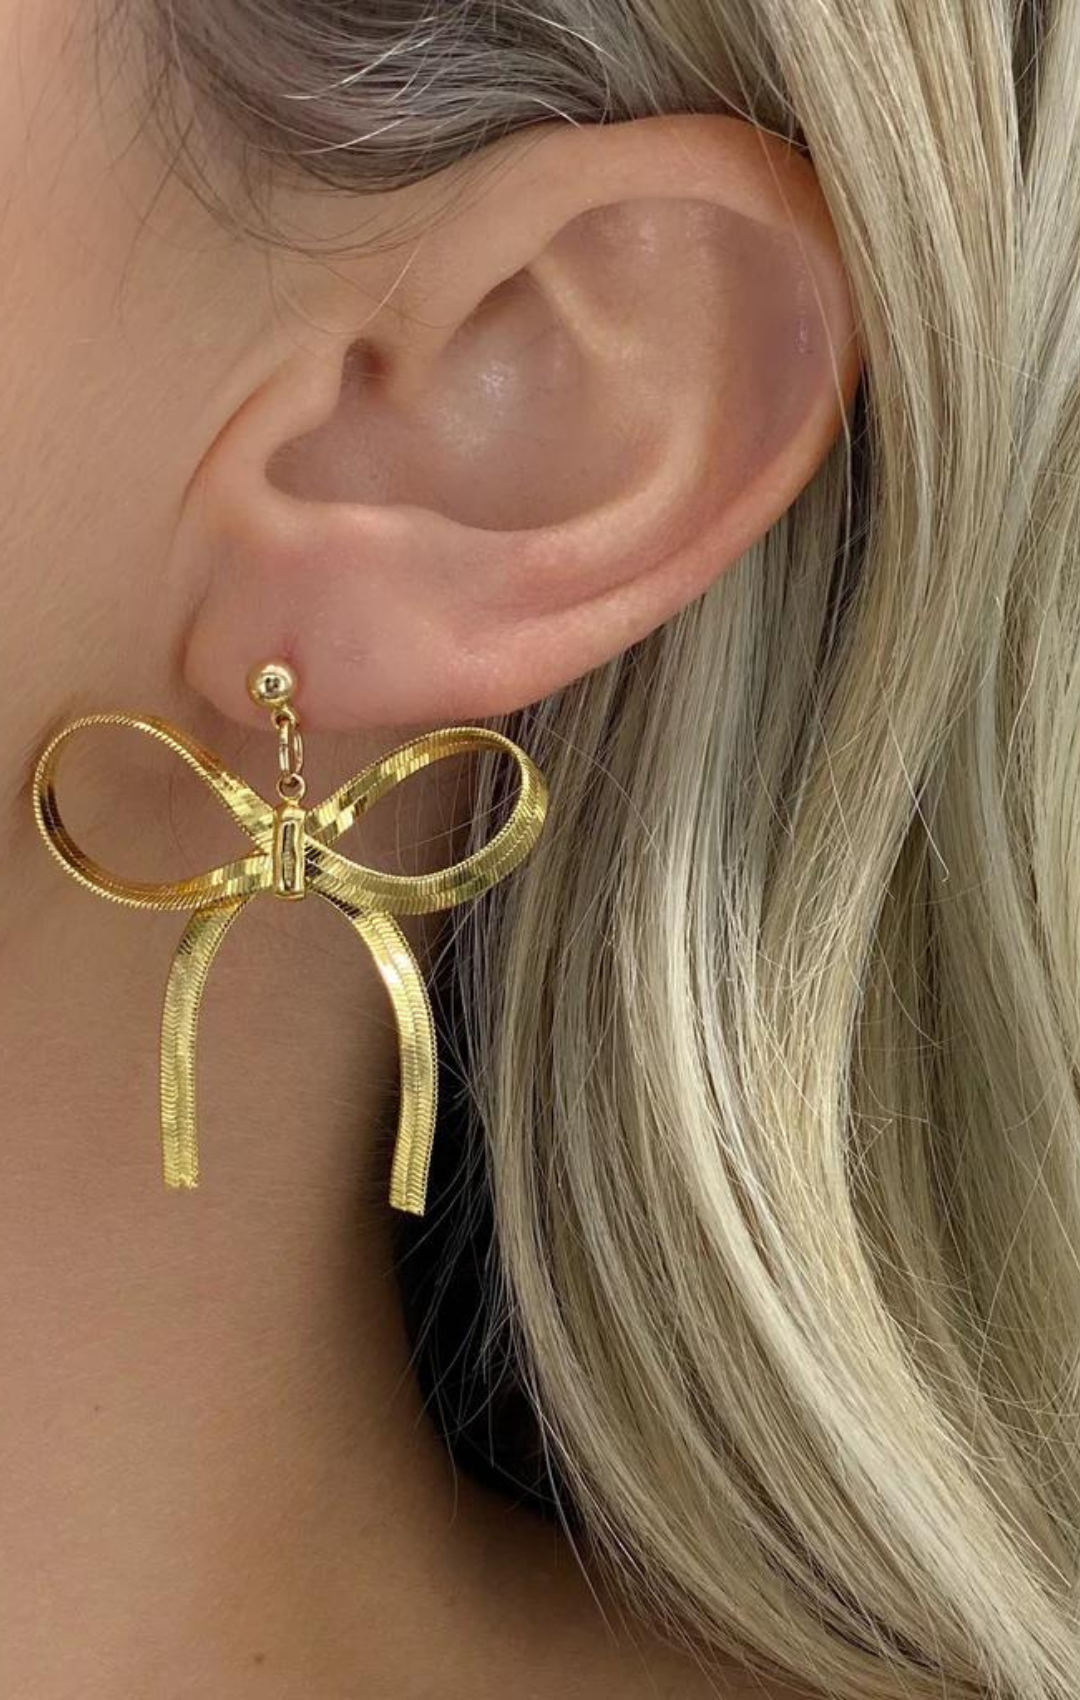 Gifted Bow Statement Earrings